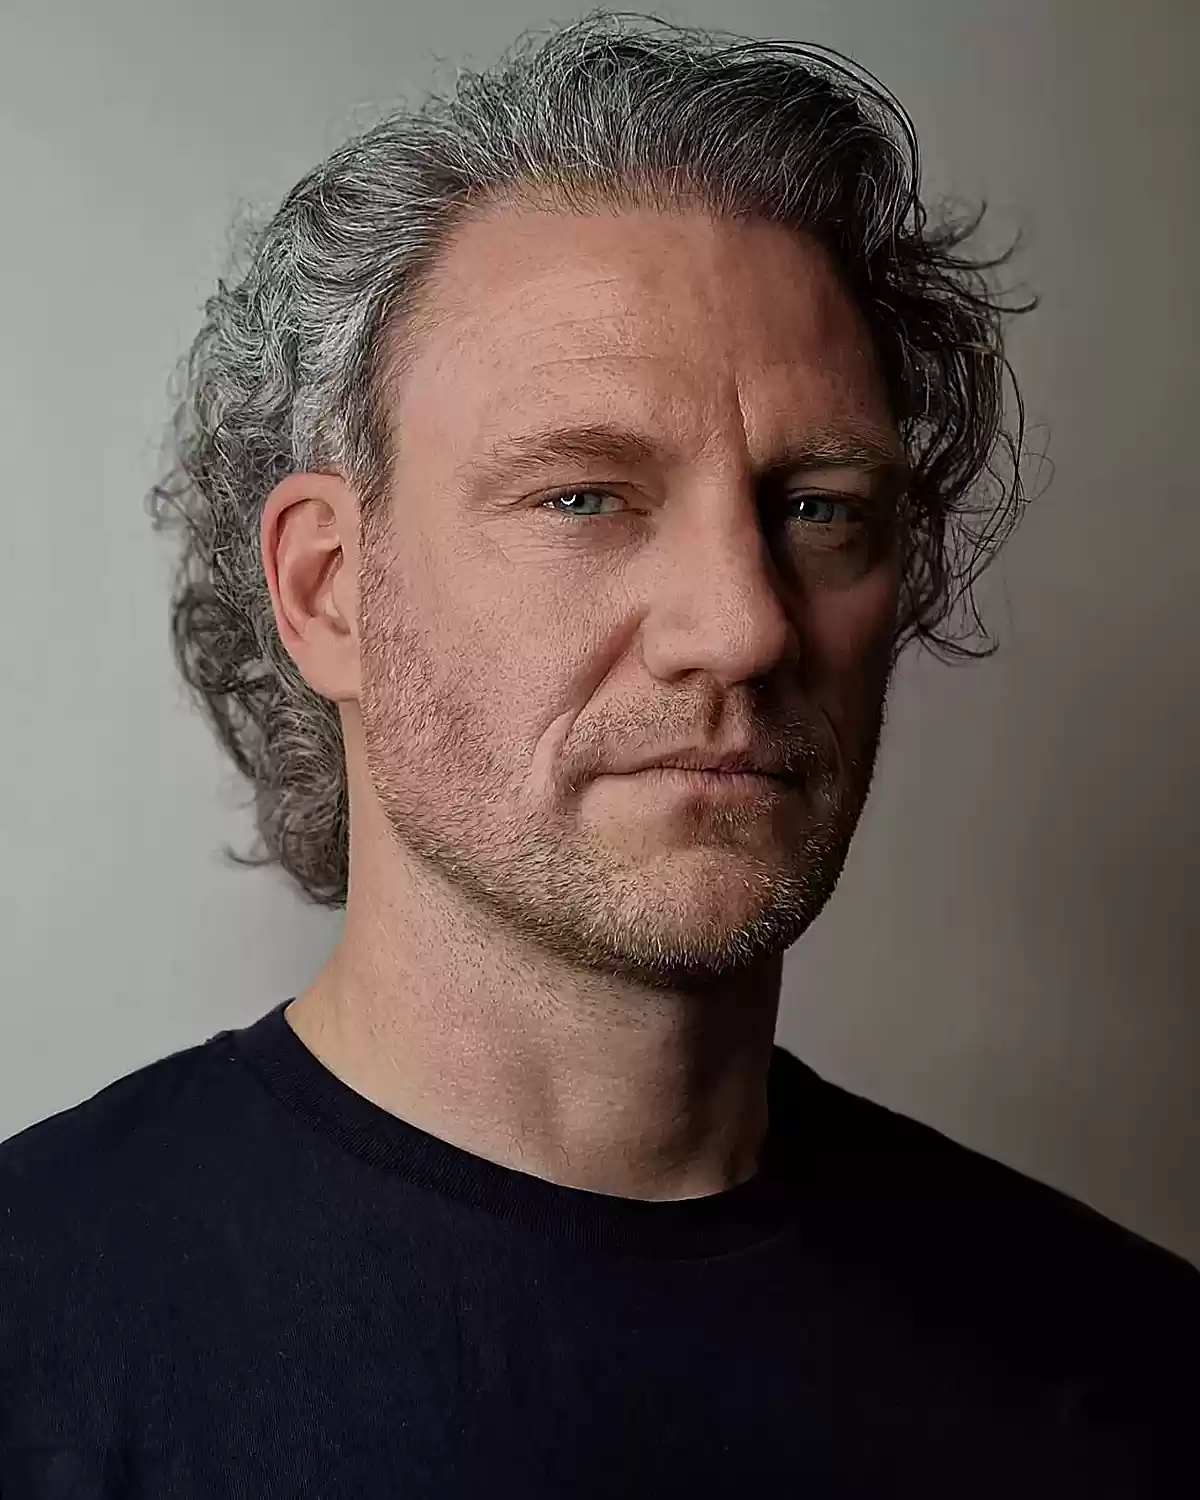 Messy silver locks for men with mid-length hair and a scruffy beard